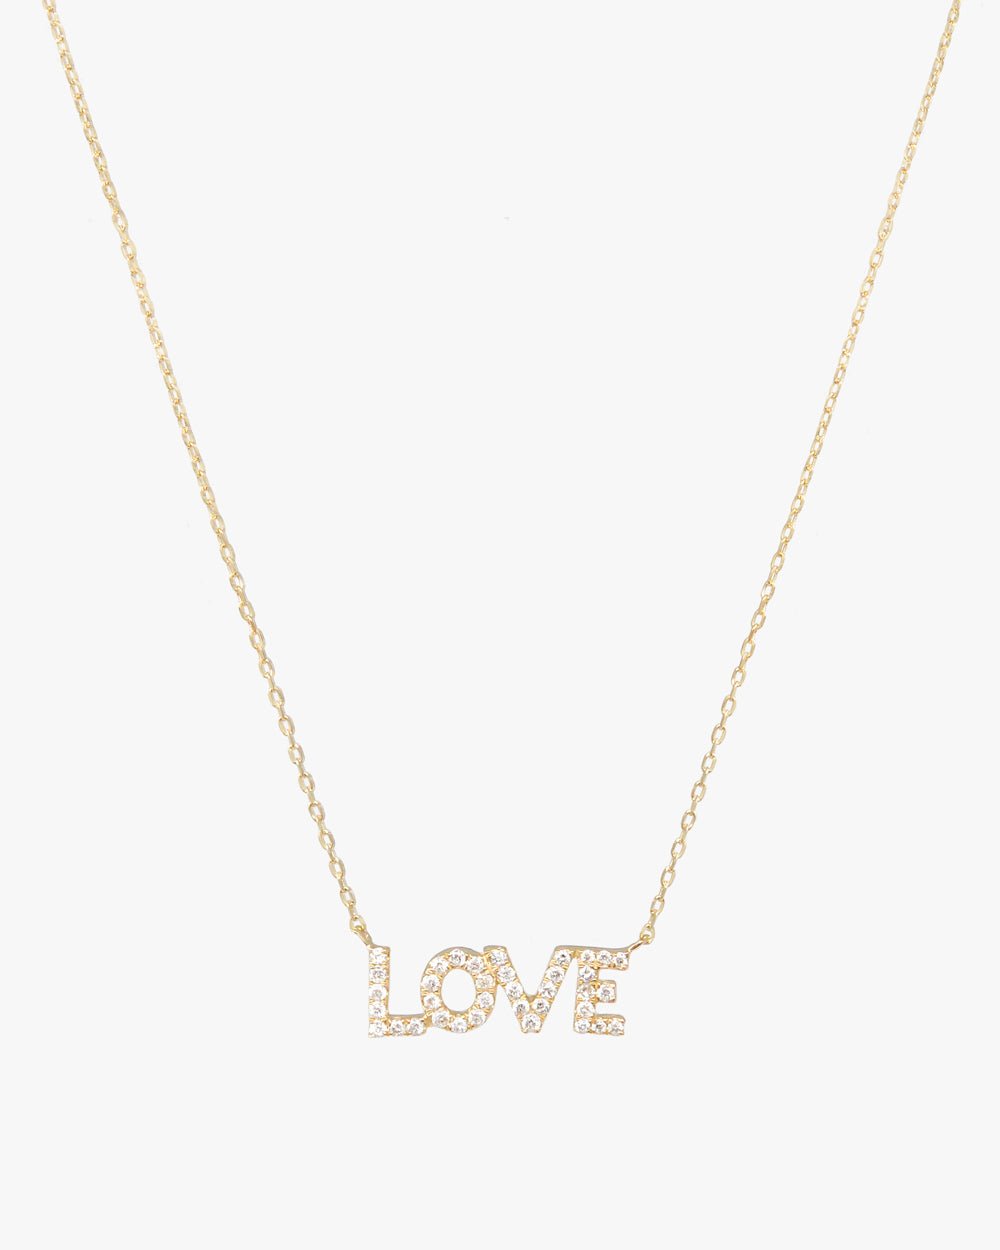 BAYSIDE DIAMOND LOVE NECKLACE - Shop Cupcakes and Cashmere